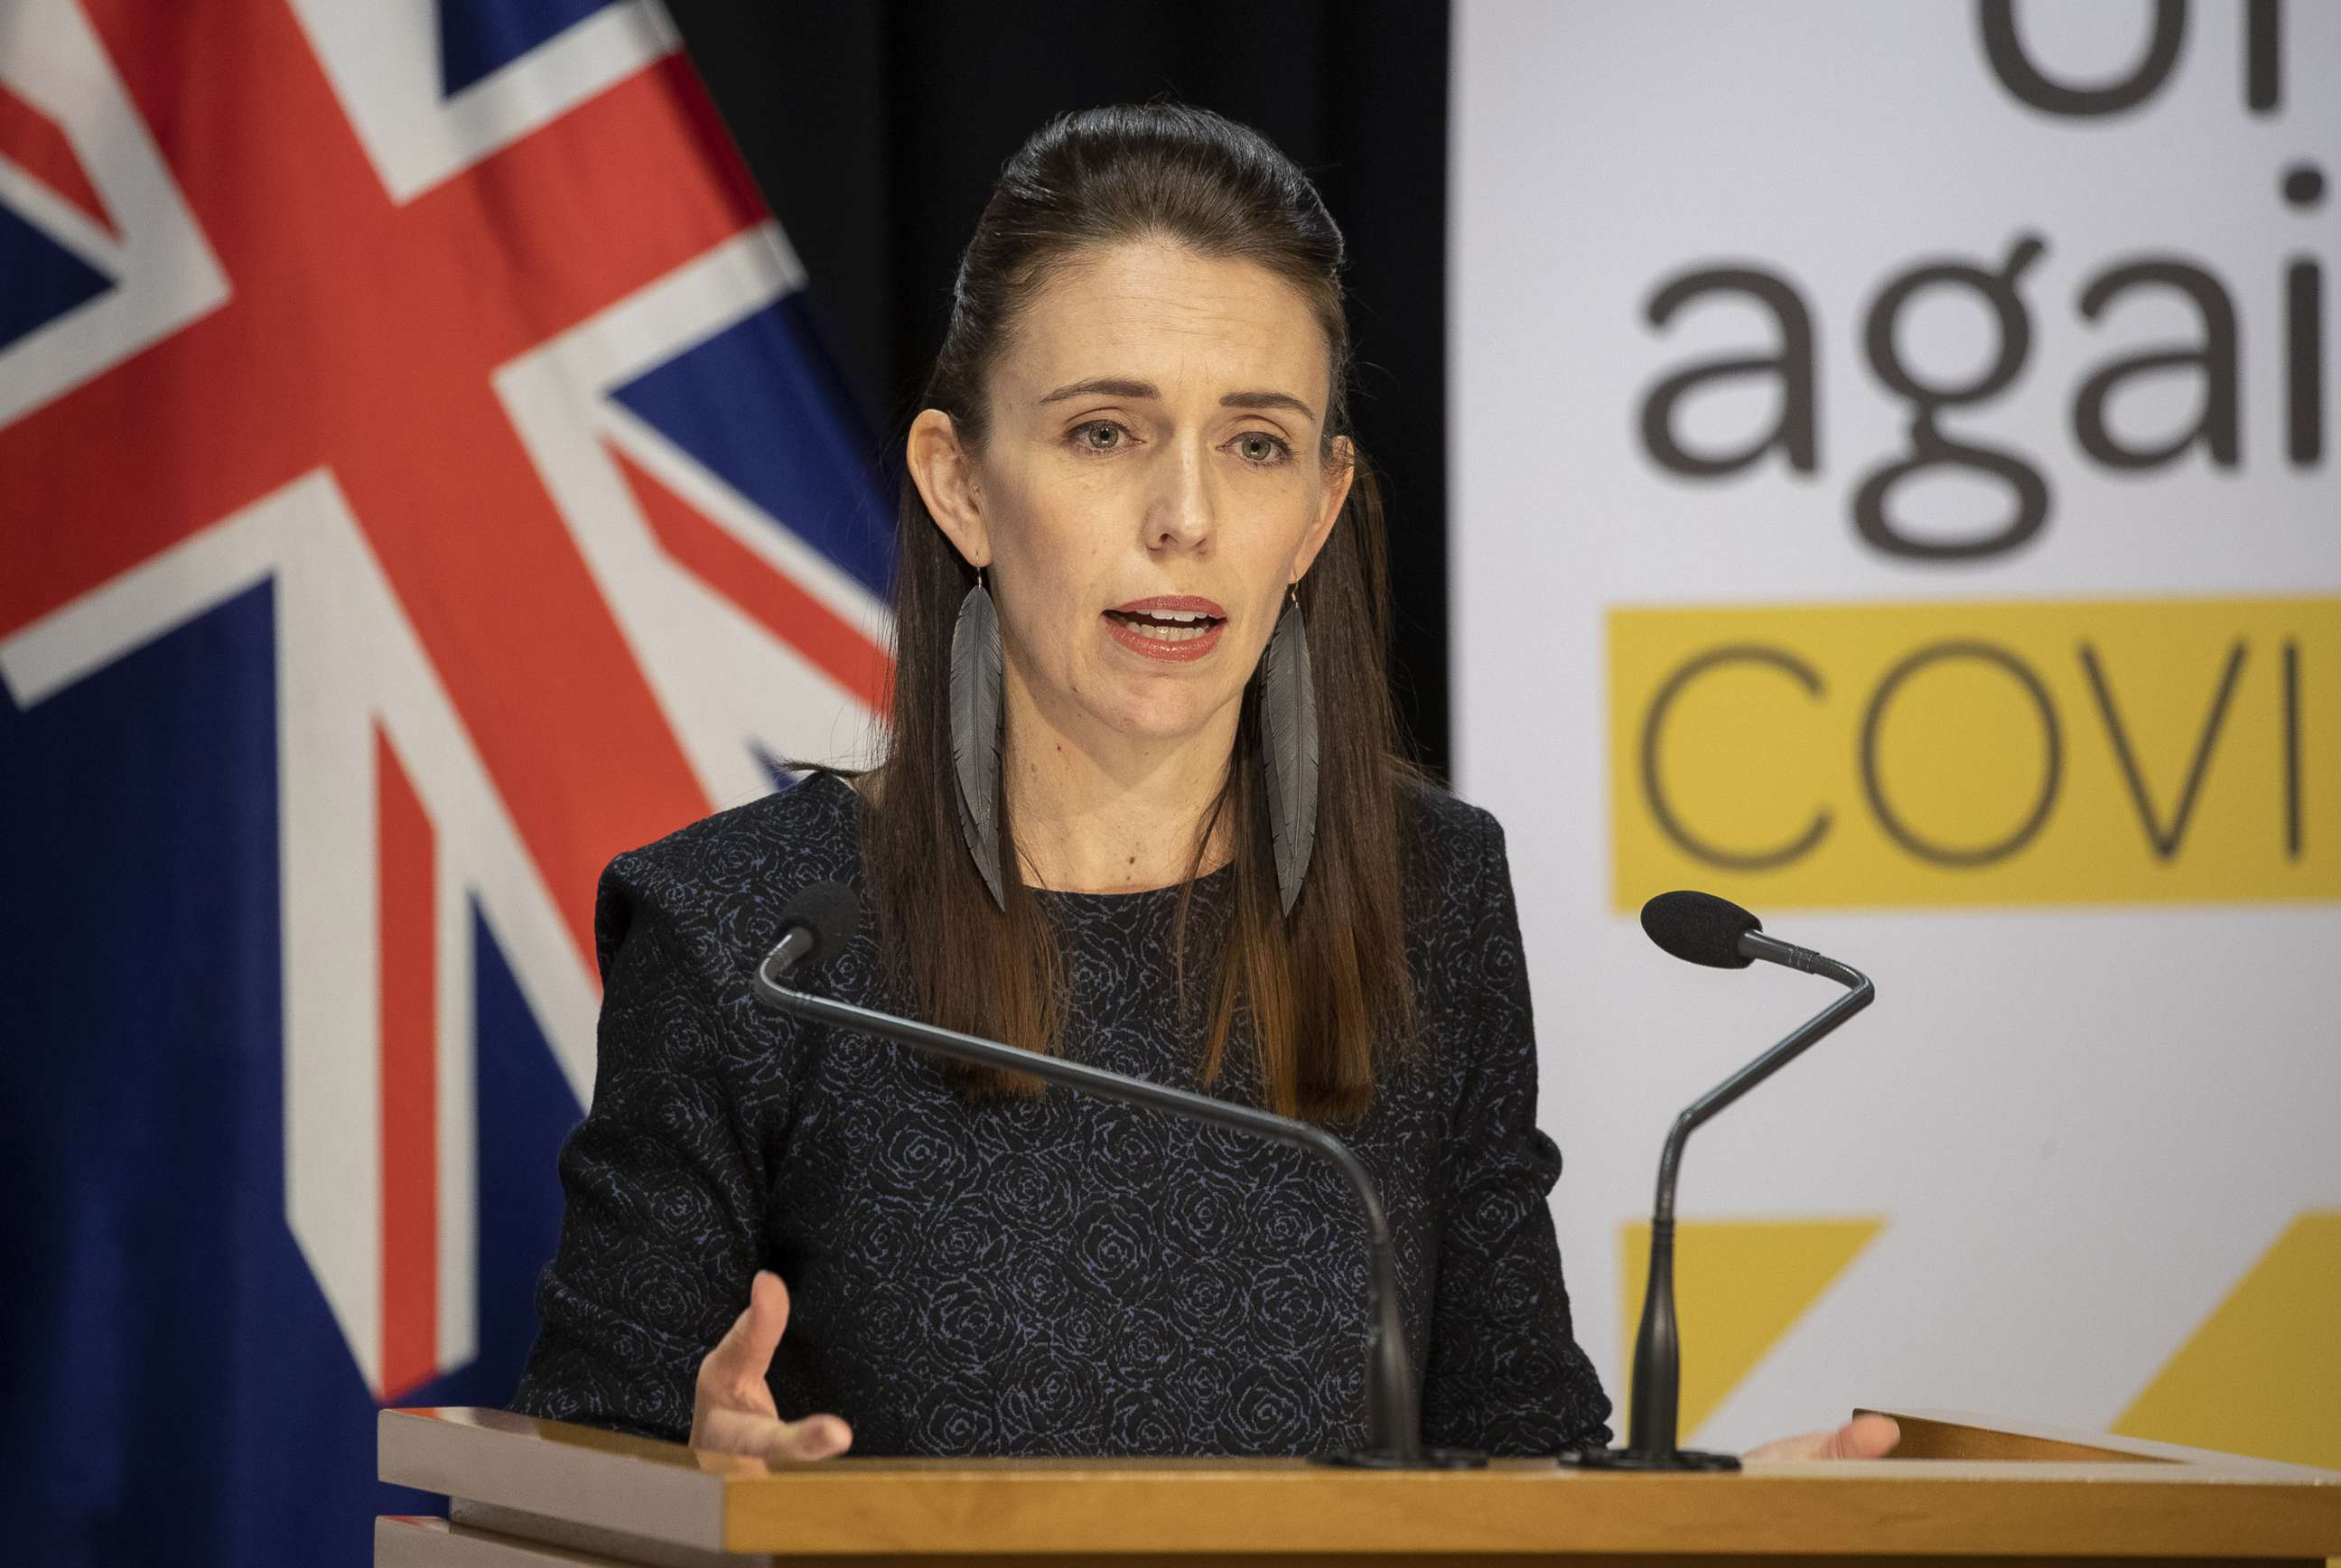 PHOTO: Prime Minister Jacinda Ardern speaks during the update on the All of Government COVID-19 national response, at Parliament on April 15, 2020, in Wellington, New Zealand.